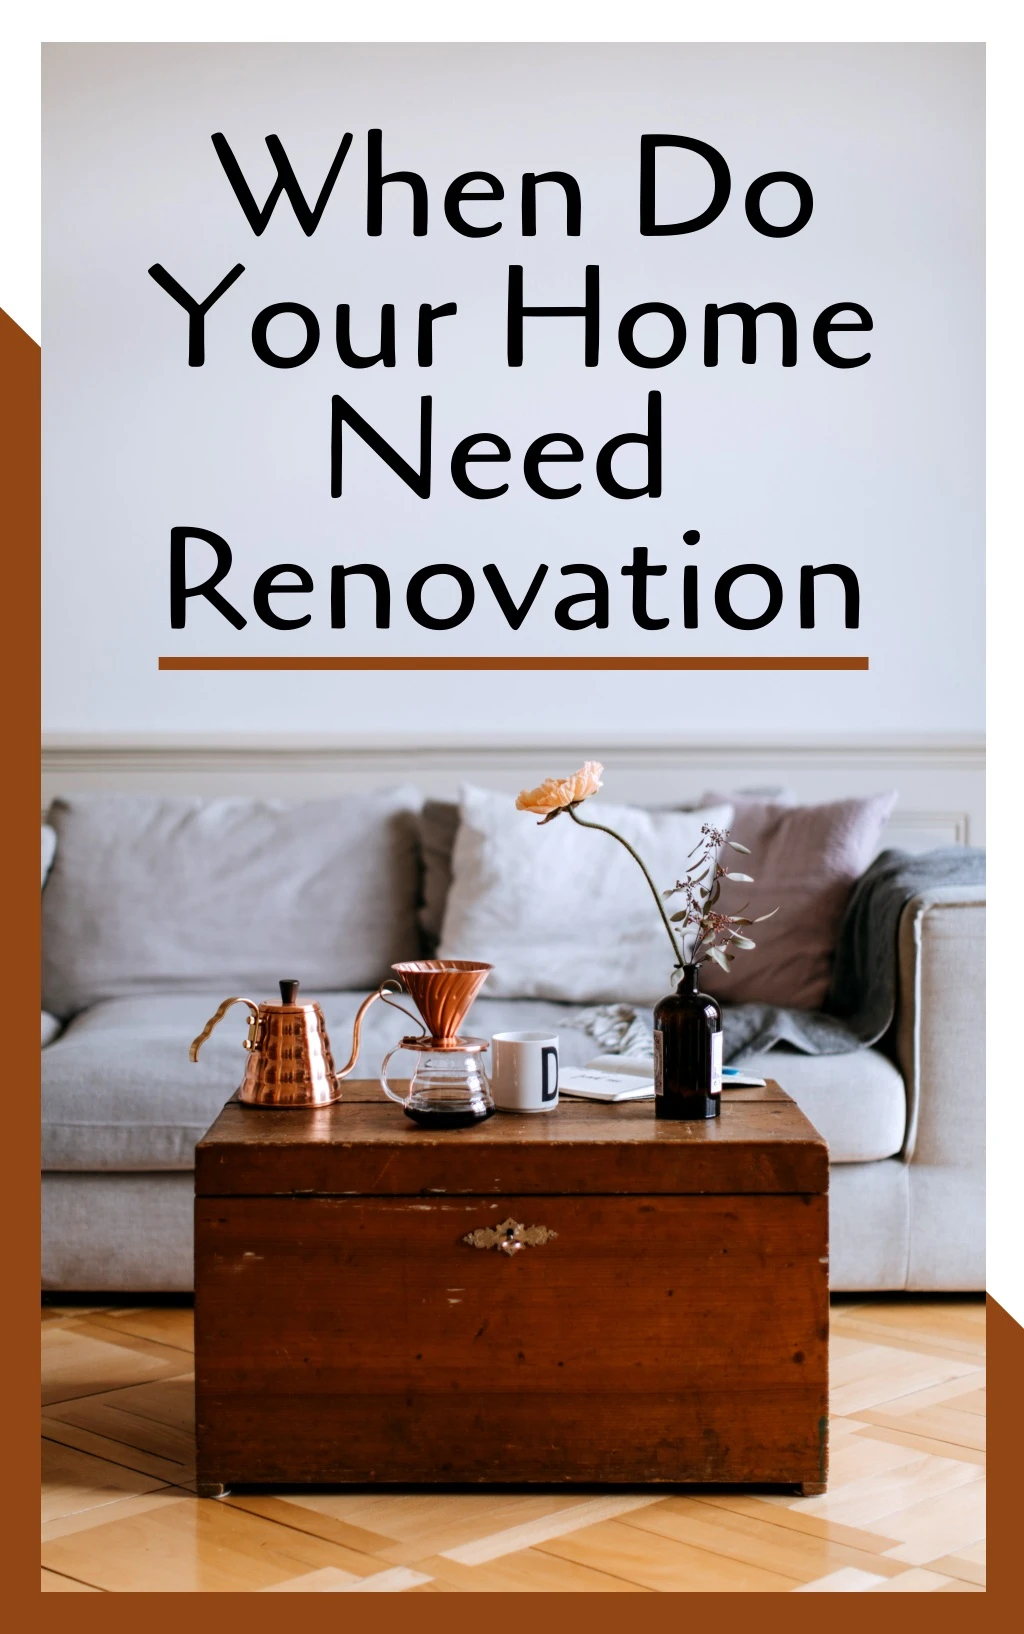 when do your home need renovation